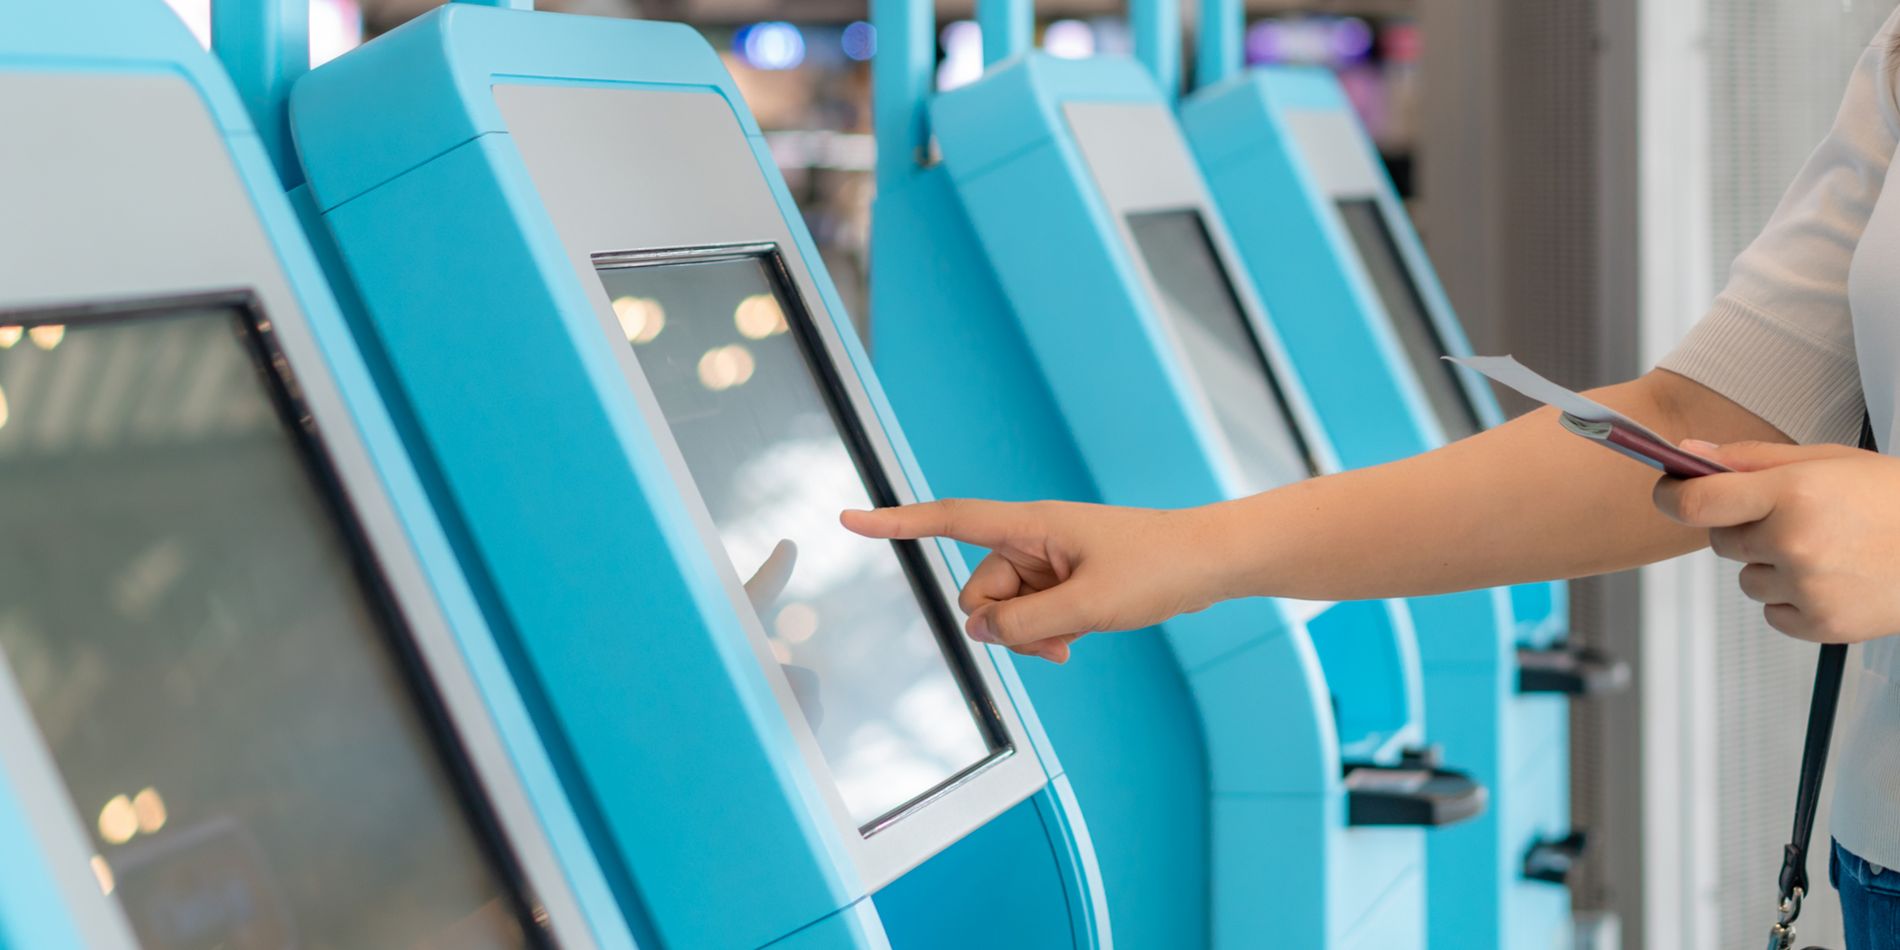 4077476 Neonode Touch Sensor Modules Selected for Contactless Airport Kiosk Trials by Doostek in South Korea - 2000x1000px